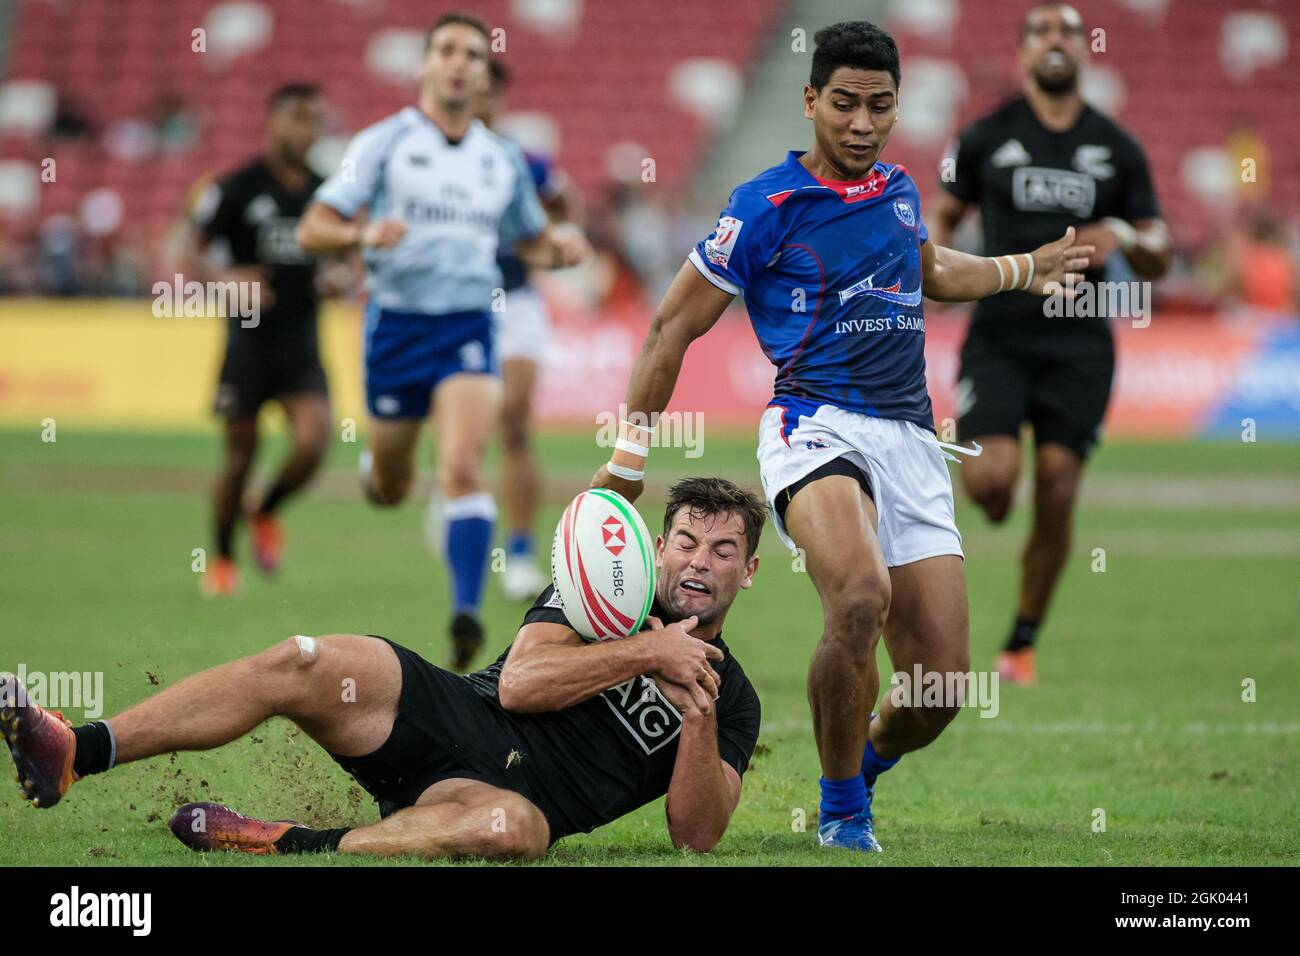 SINGAPORE-APRIL 14: Andrew Knewstubb of New Zealand 7s Team (left/black) plays against a Samoa 7s team player (blue) during Day 2 of HSBC World Rugby Singapore Sevens on April 14, 2019 at National Stadium in Singapore Stock Photo